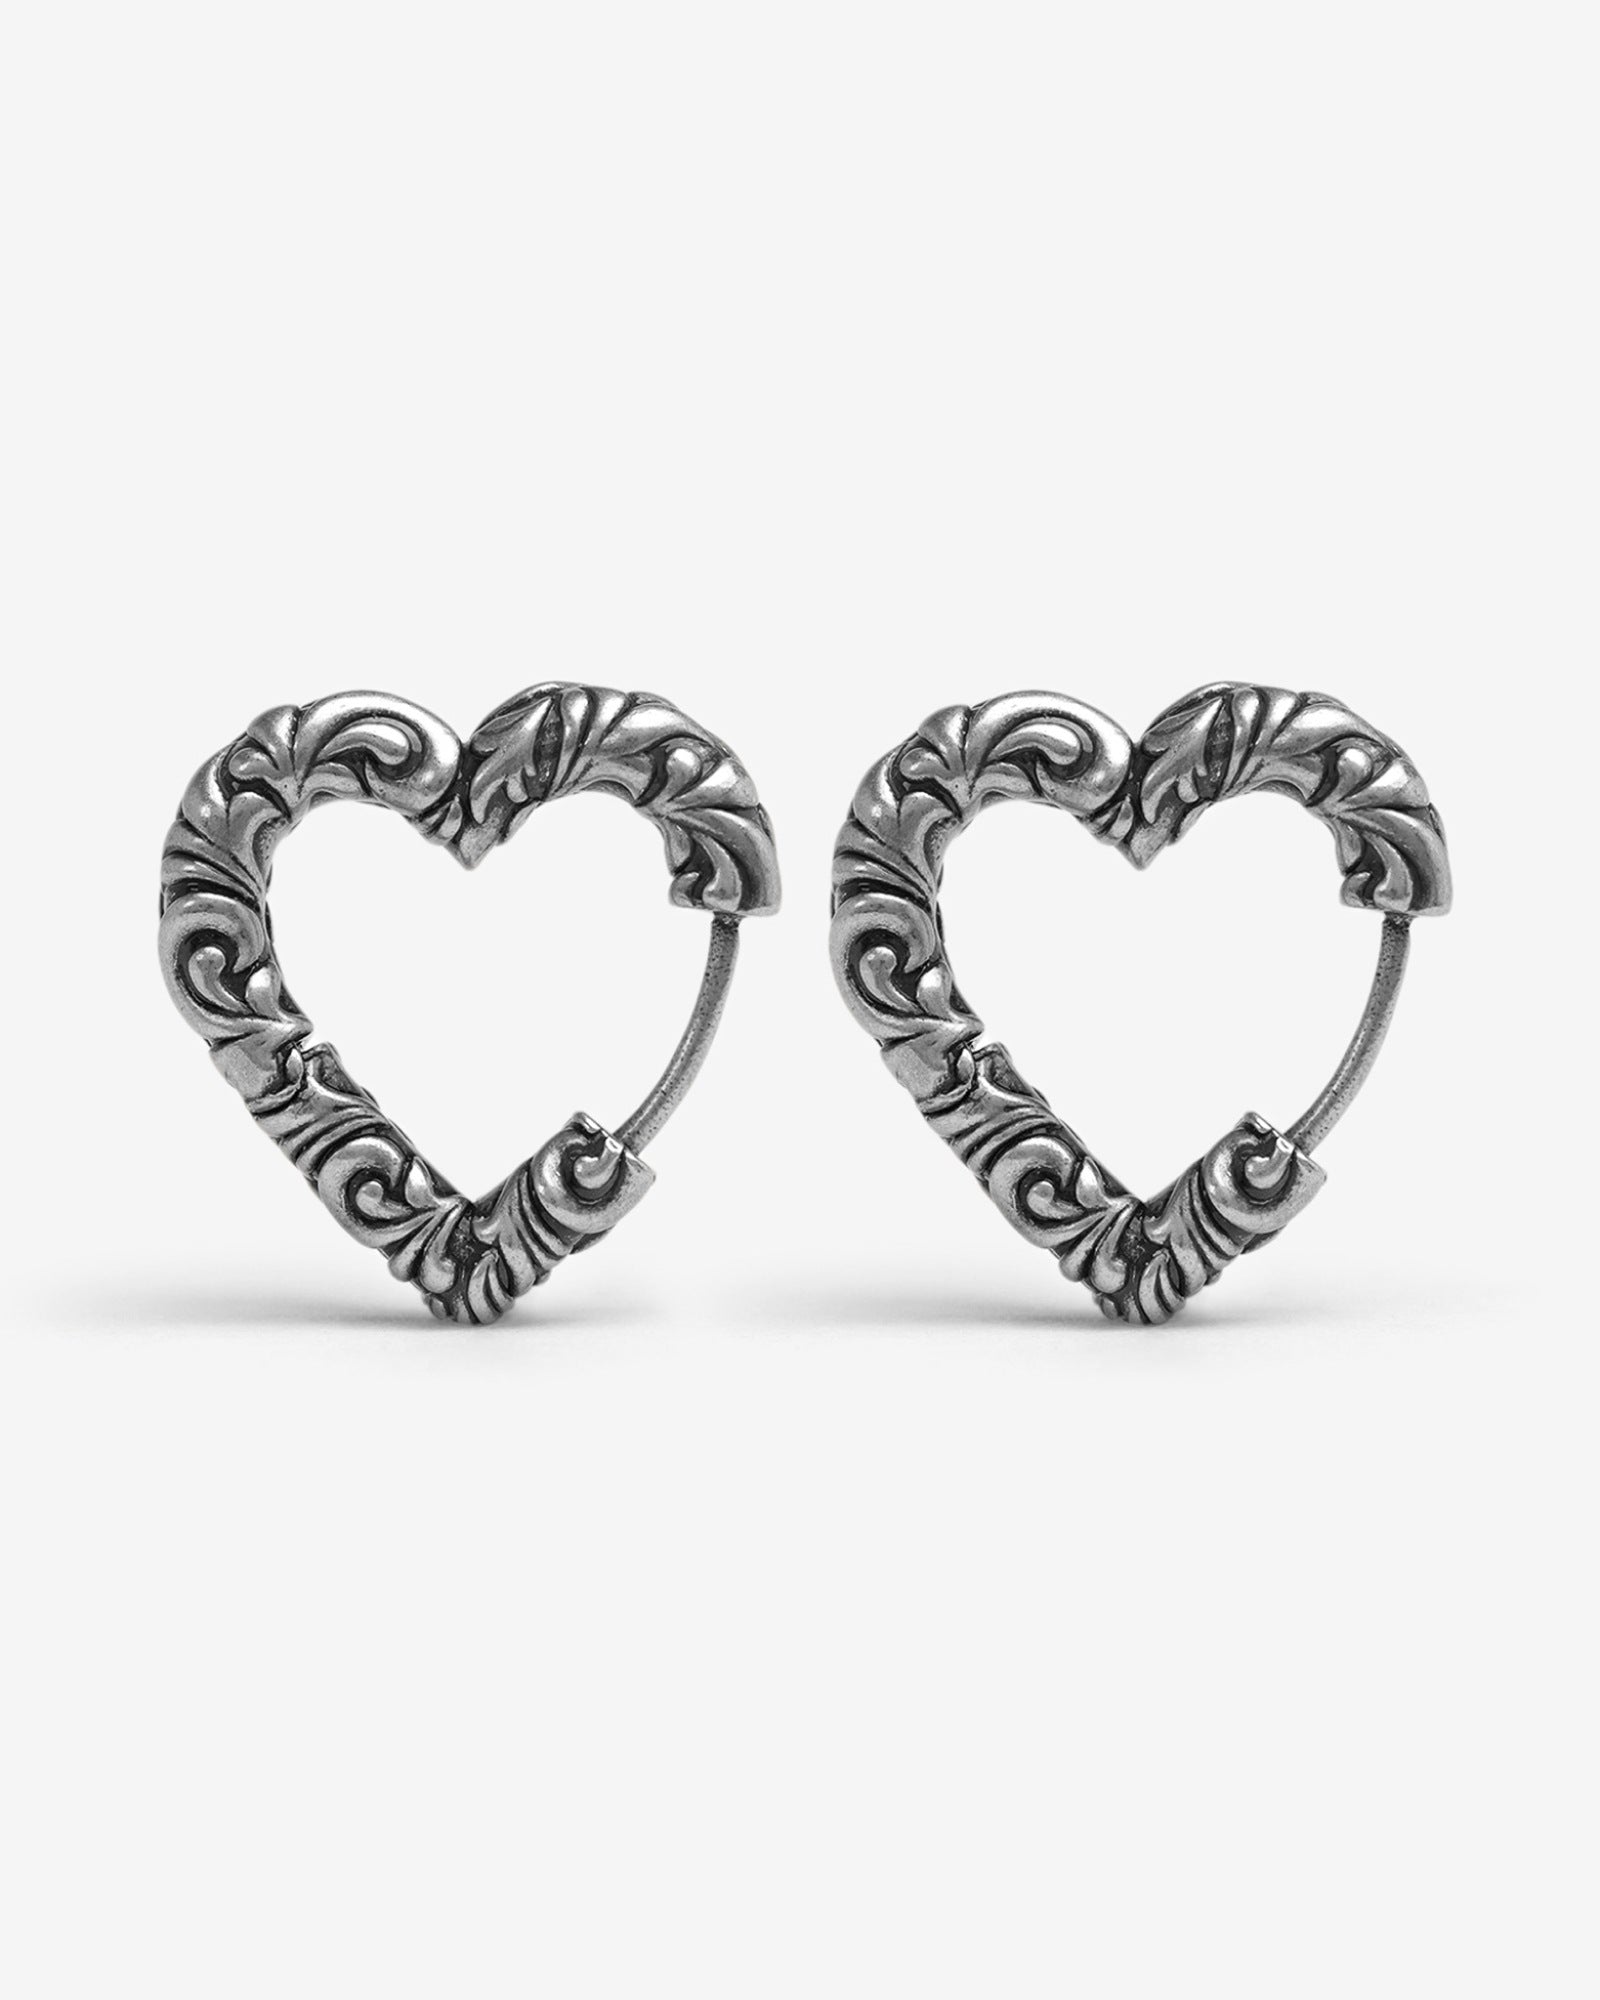 Buy Simulated Diamond Dancing Stone Heart Earrings in Rhodium Over Sterling  Silver 1.50 ctw at ShopLC.